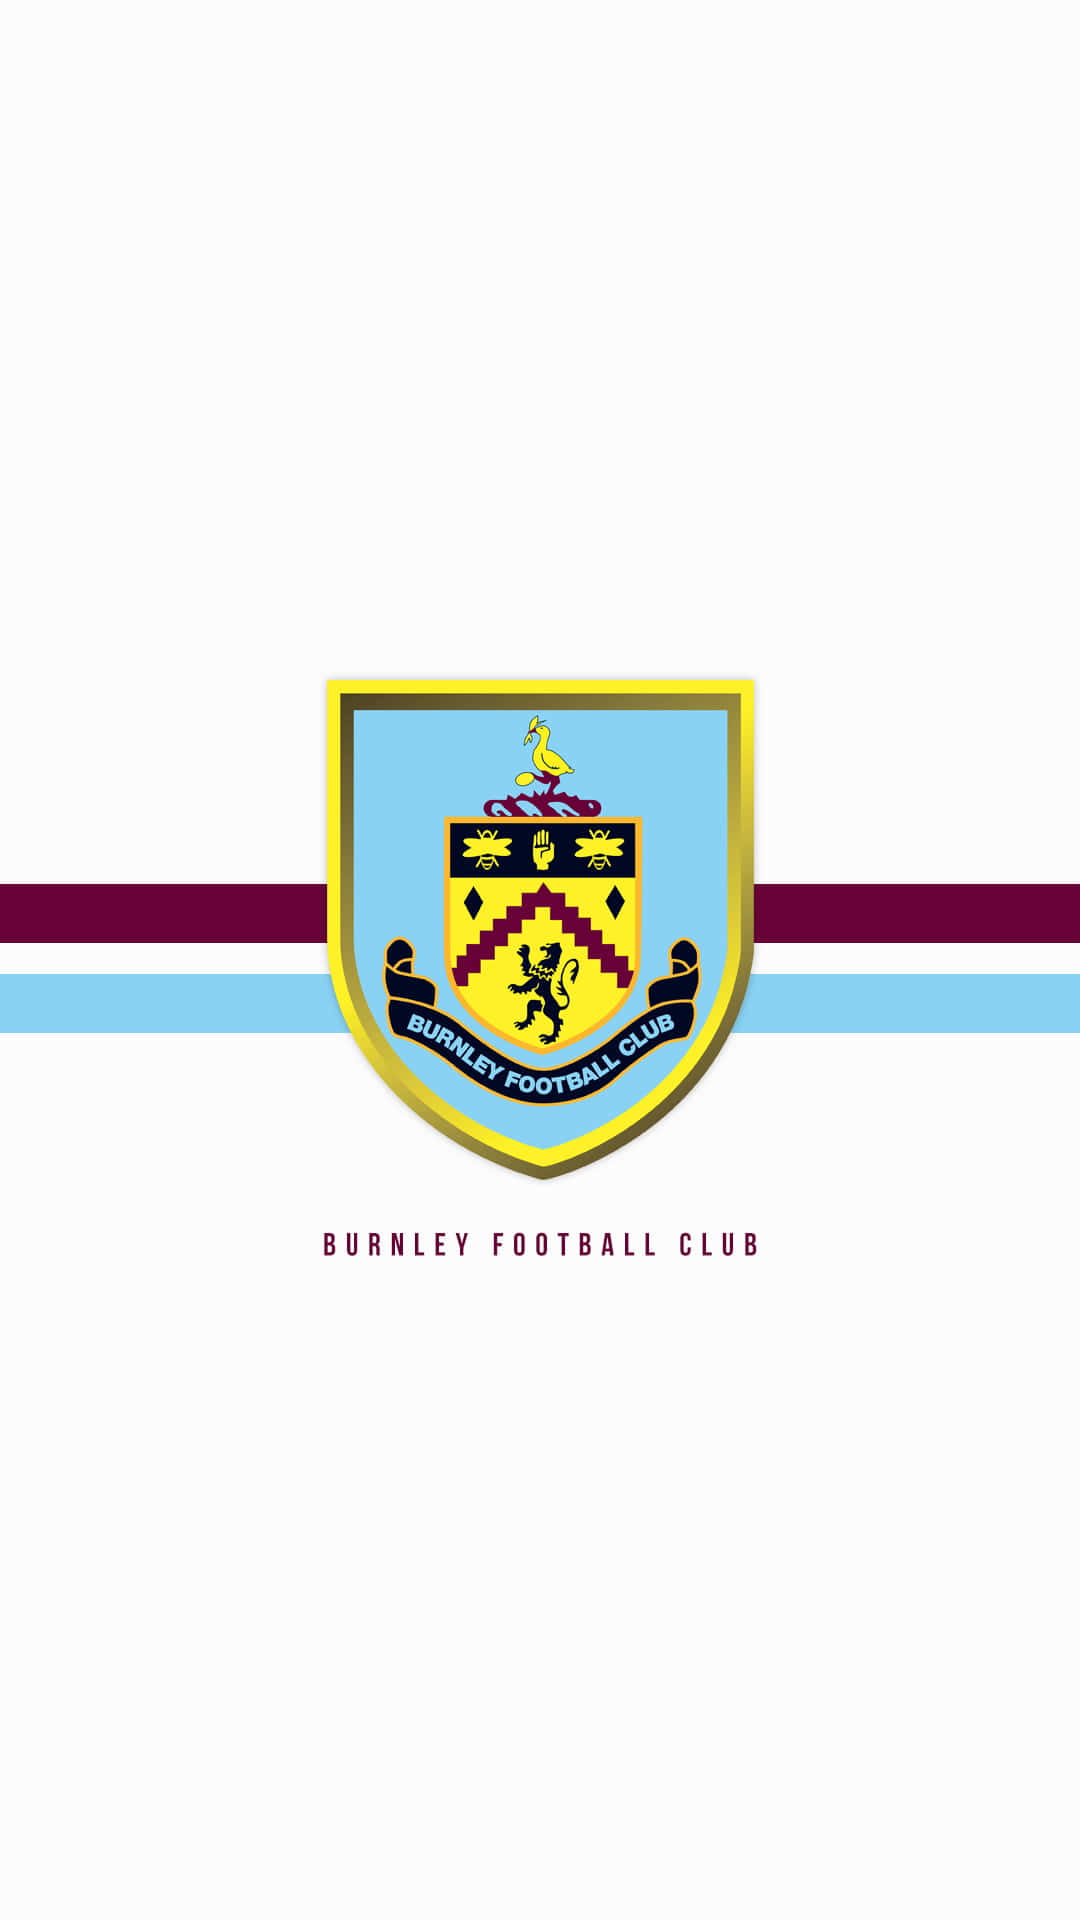 Burnley FC players celebrating a goal on the field Wallpaper